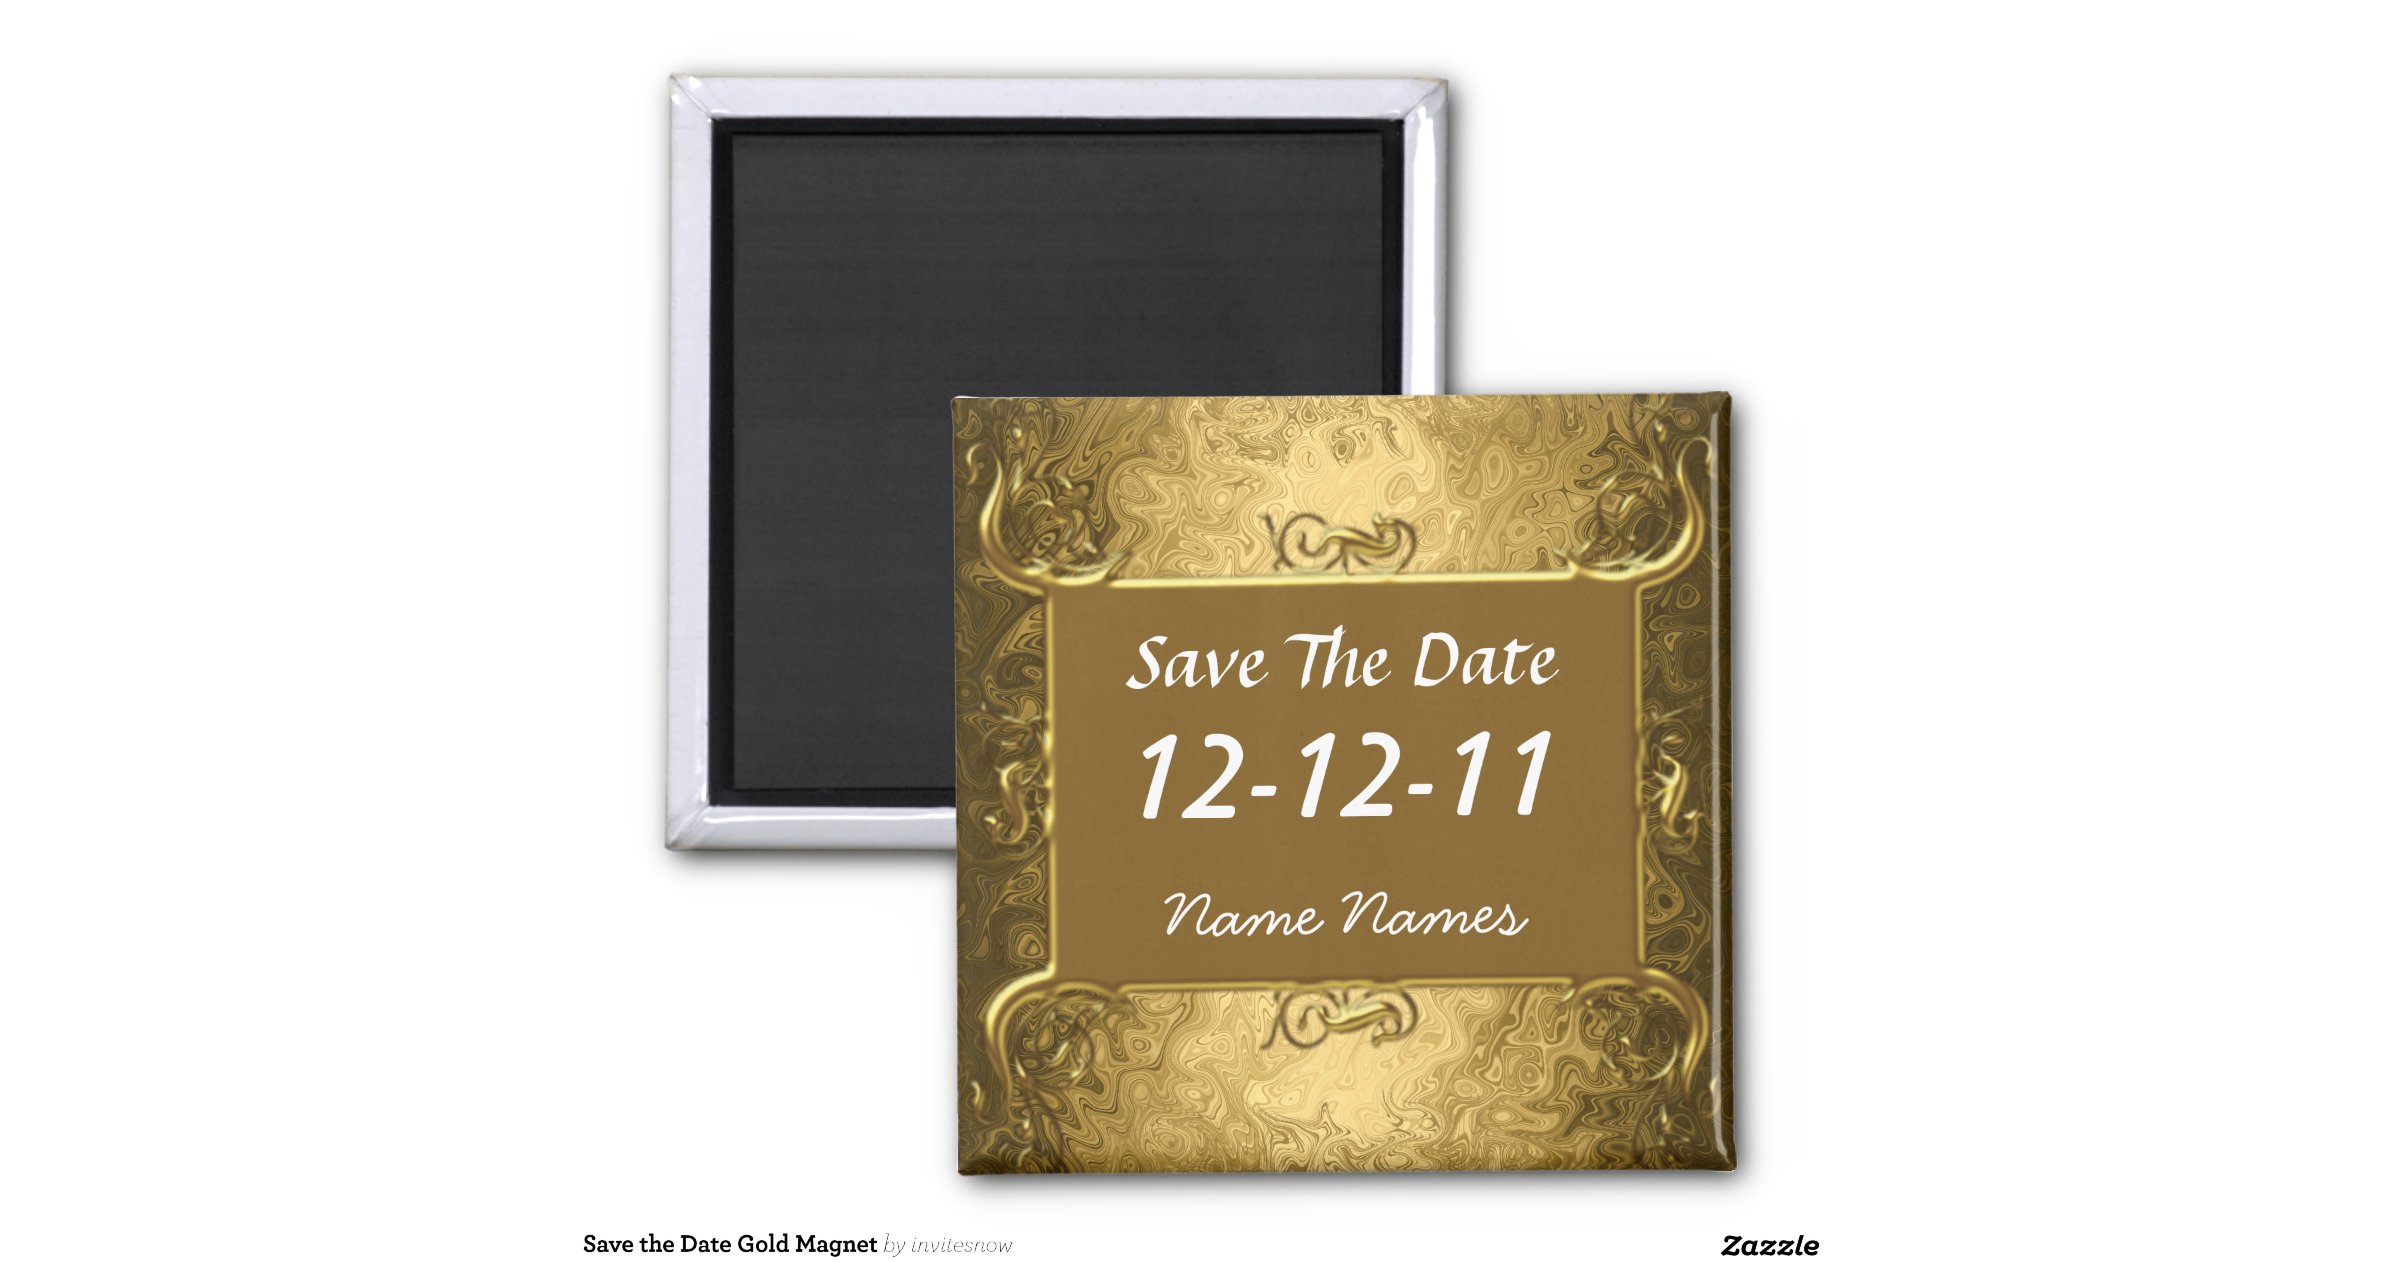 Design My Own Save The Date 9